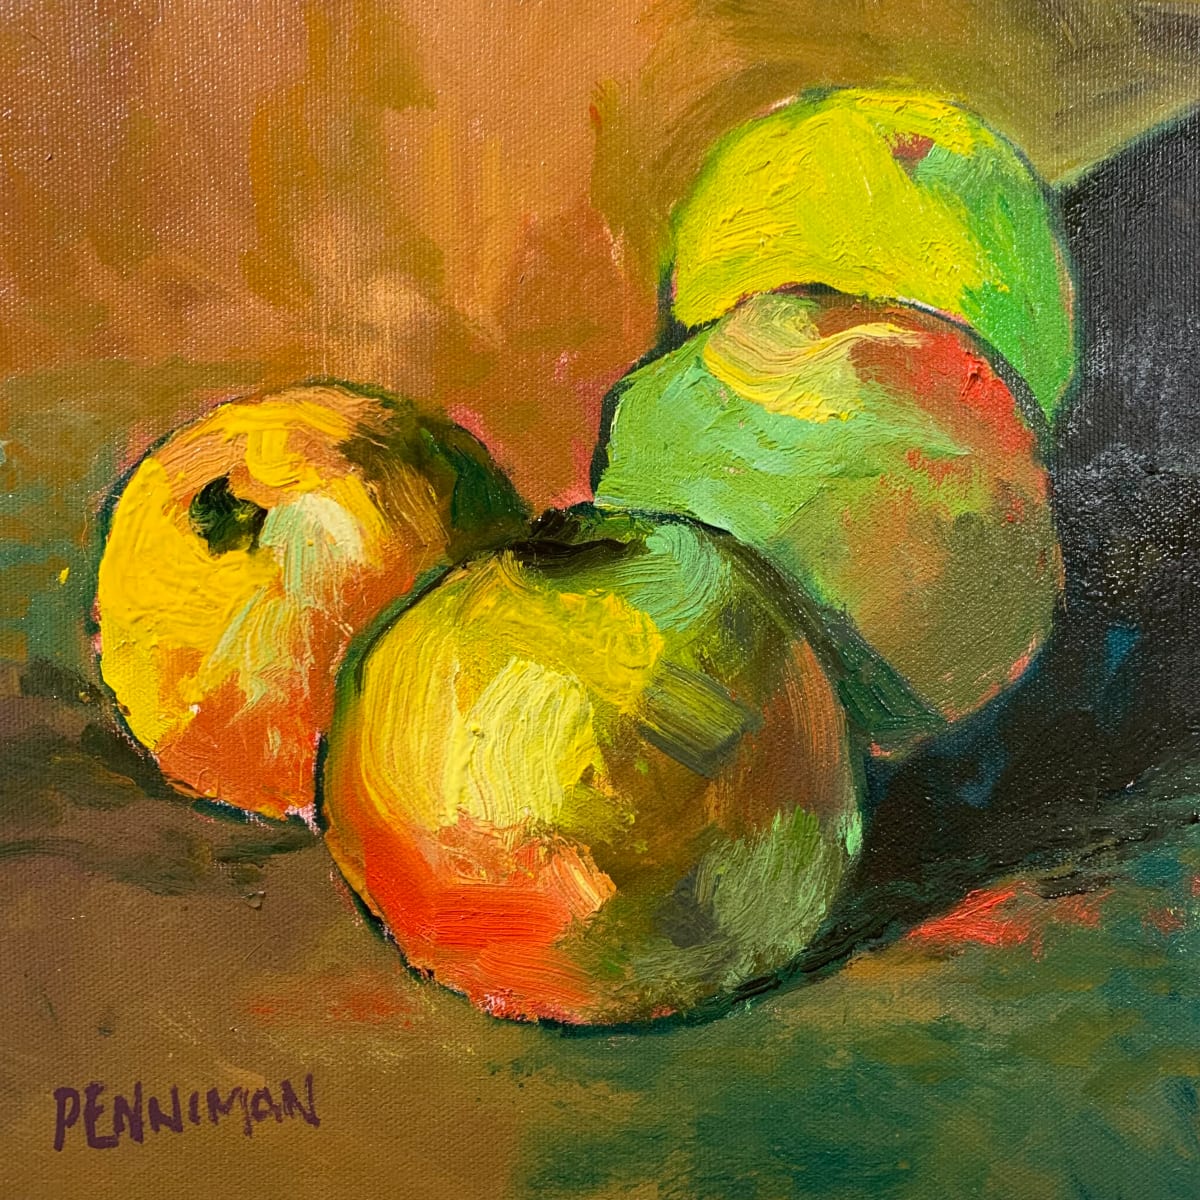 Cézanne's Apples II by Ed Penniman  Image: Exploring brushwork, two primaries, and one secondary with Paul Cézanne.